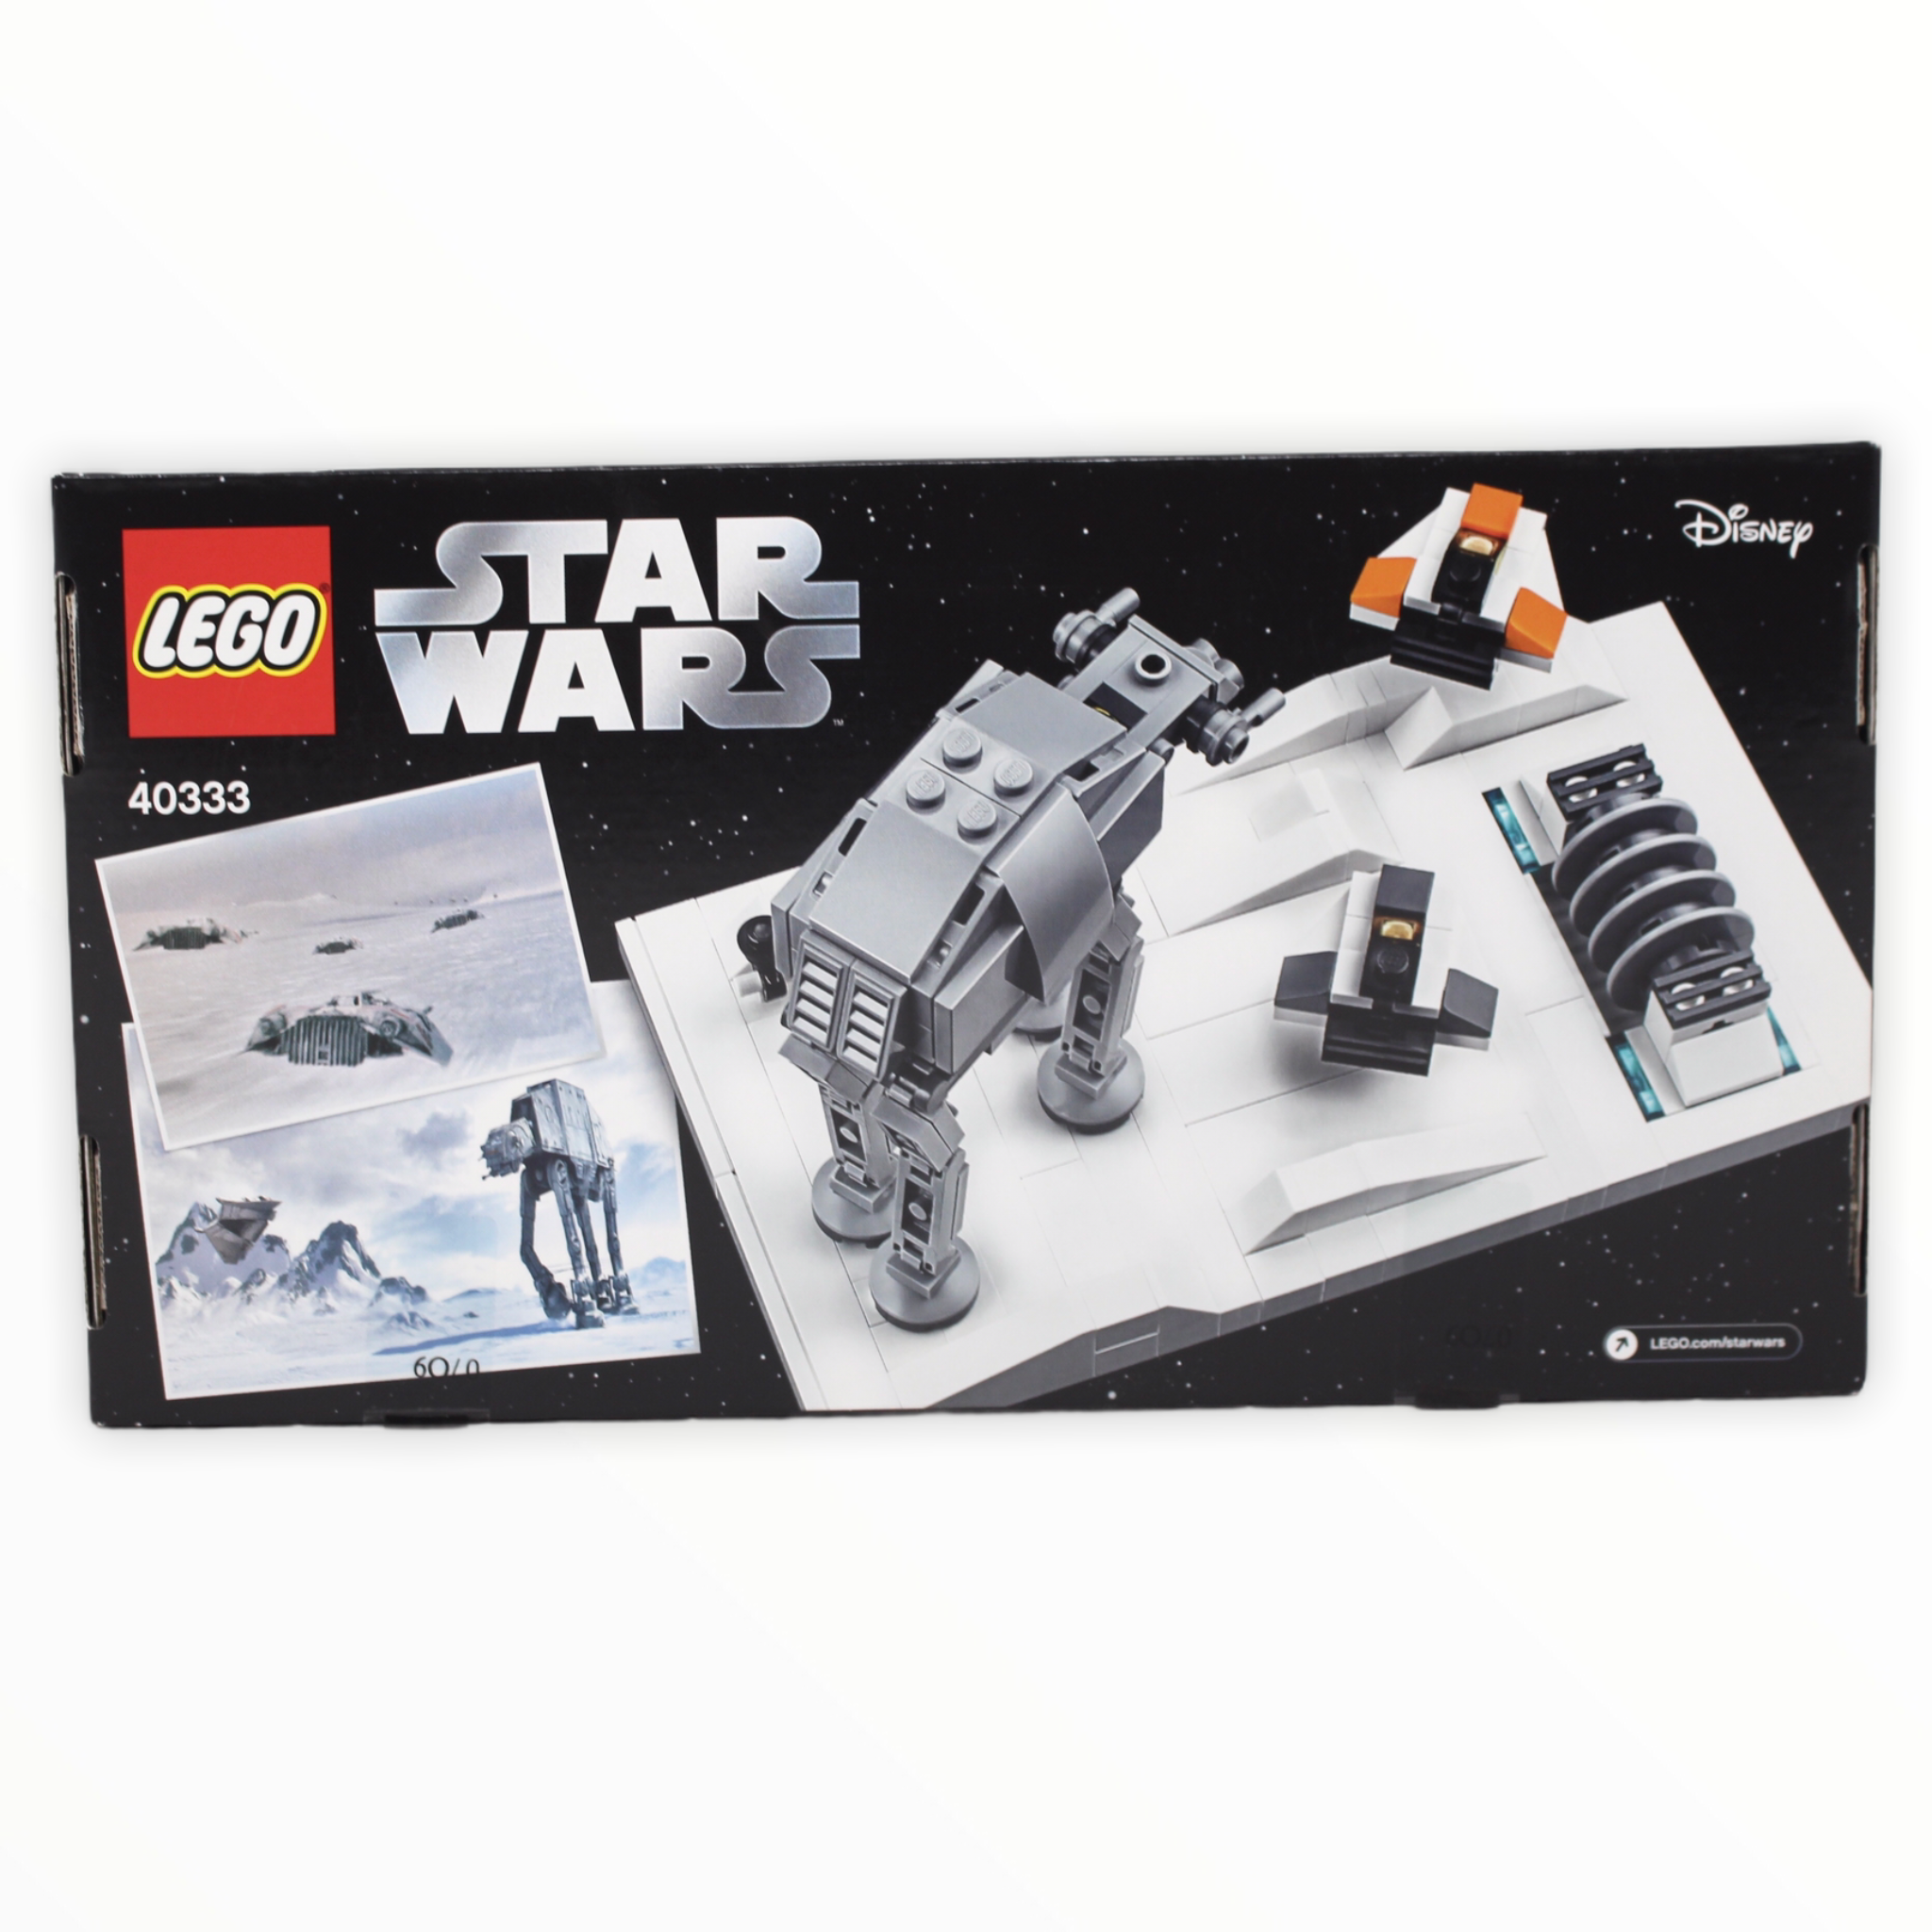 Retired Set 40333 Star Wars Battle of Hoth - 20th Anniversary Edition